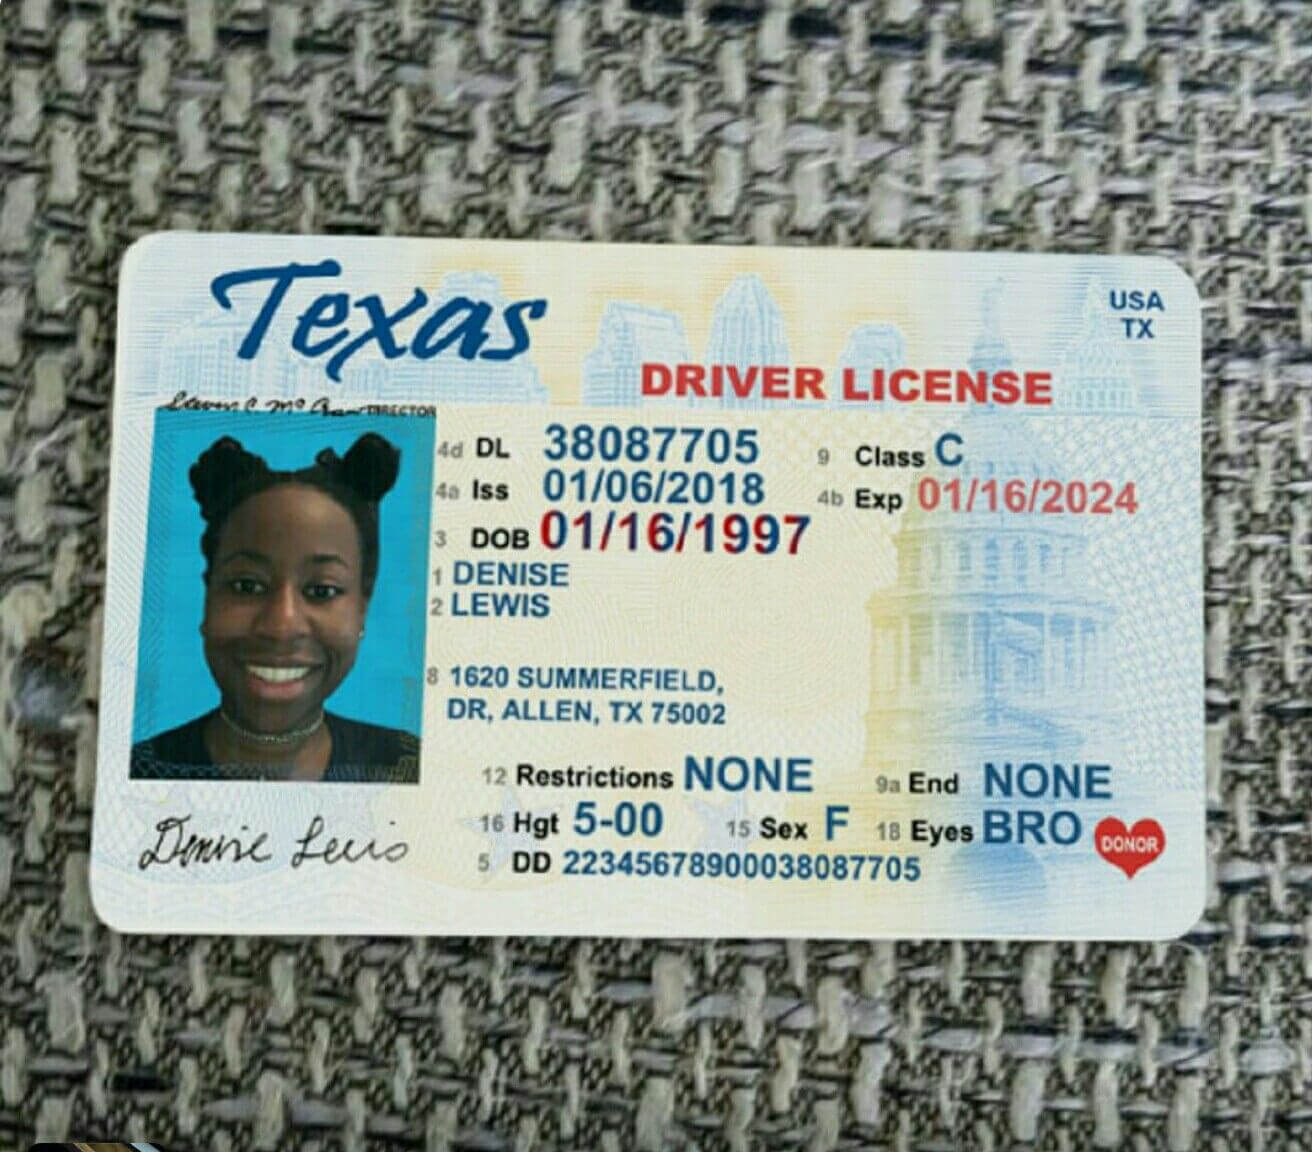 Pinsarah Brown Reusser On Drivers Permit In 2019 In Texas Id Card Template